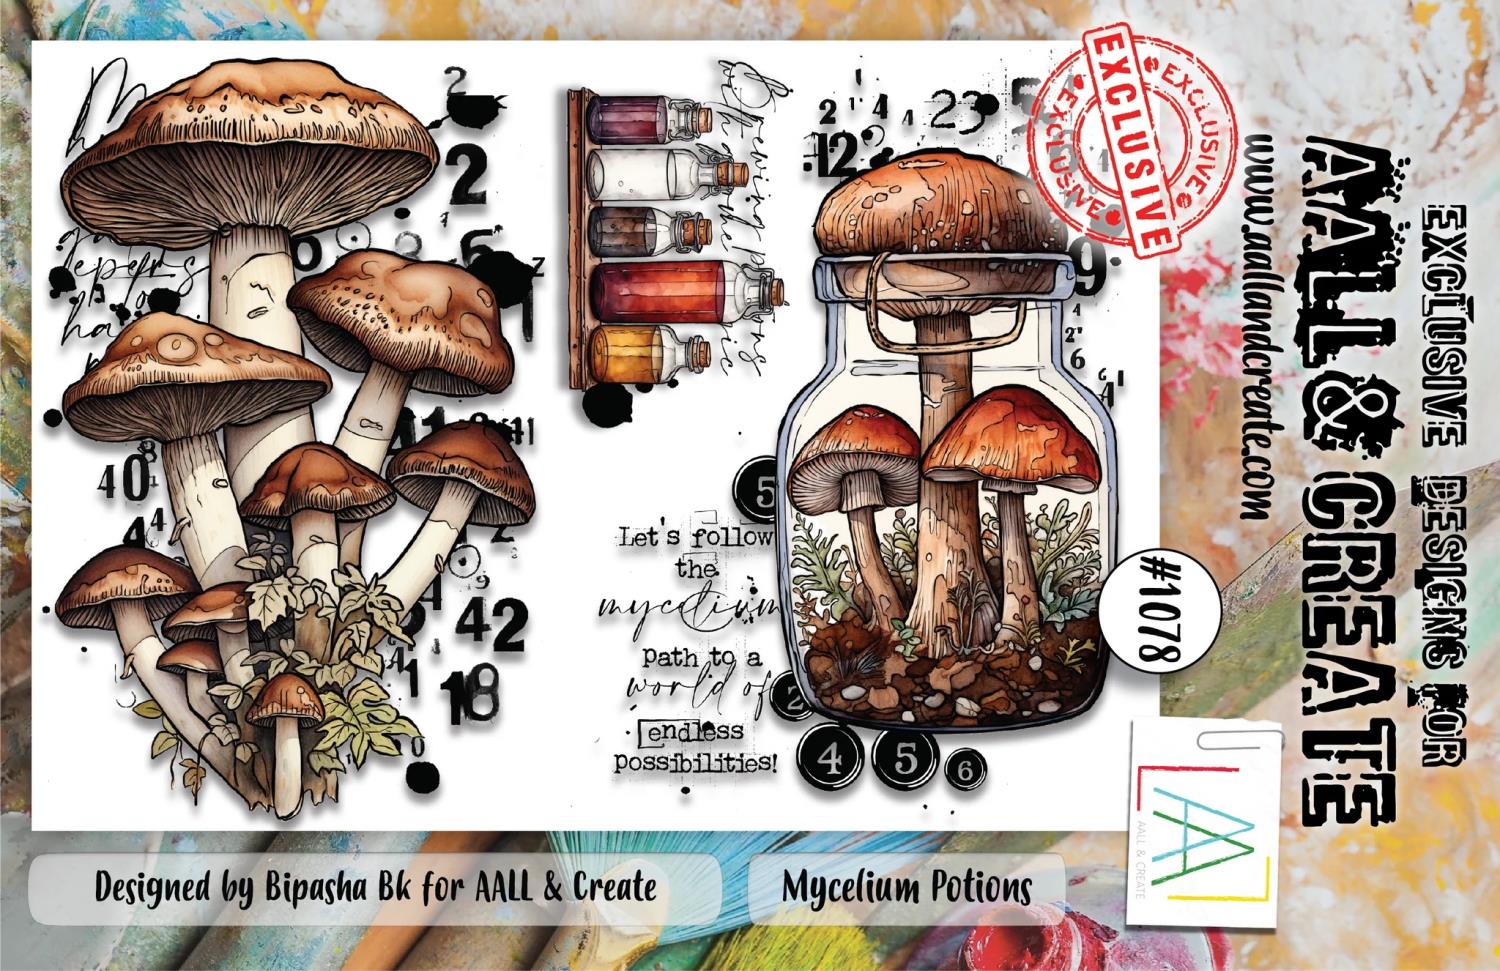 Aall & Create - #1078 - A6 STAMP SET - Mycelium Potions